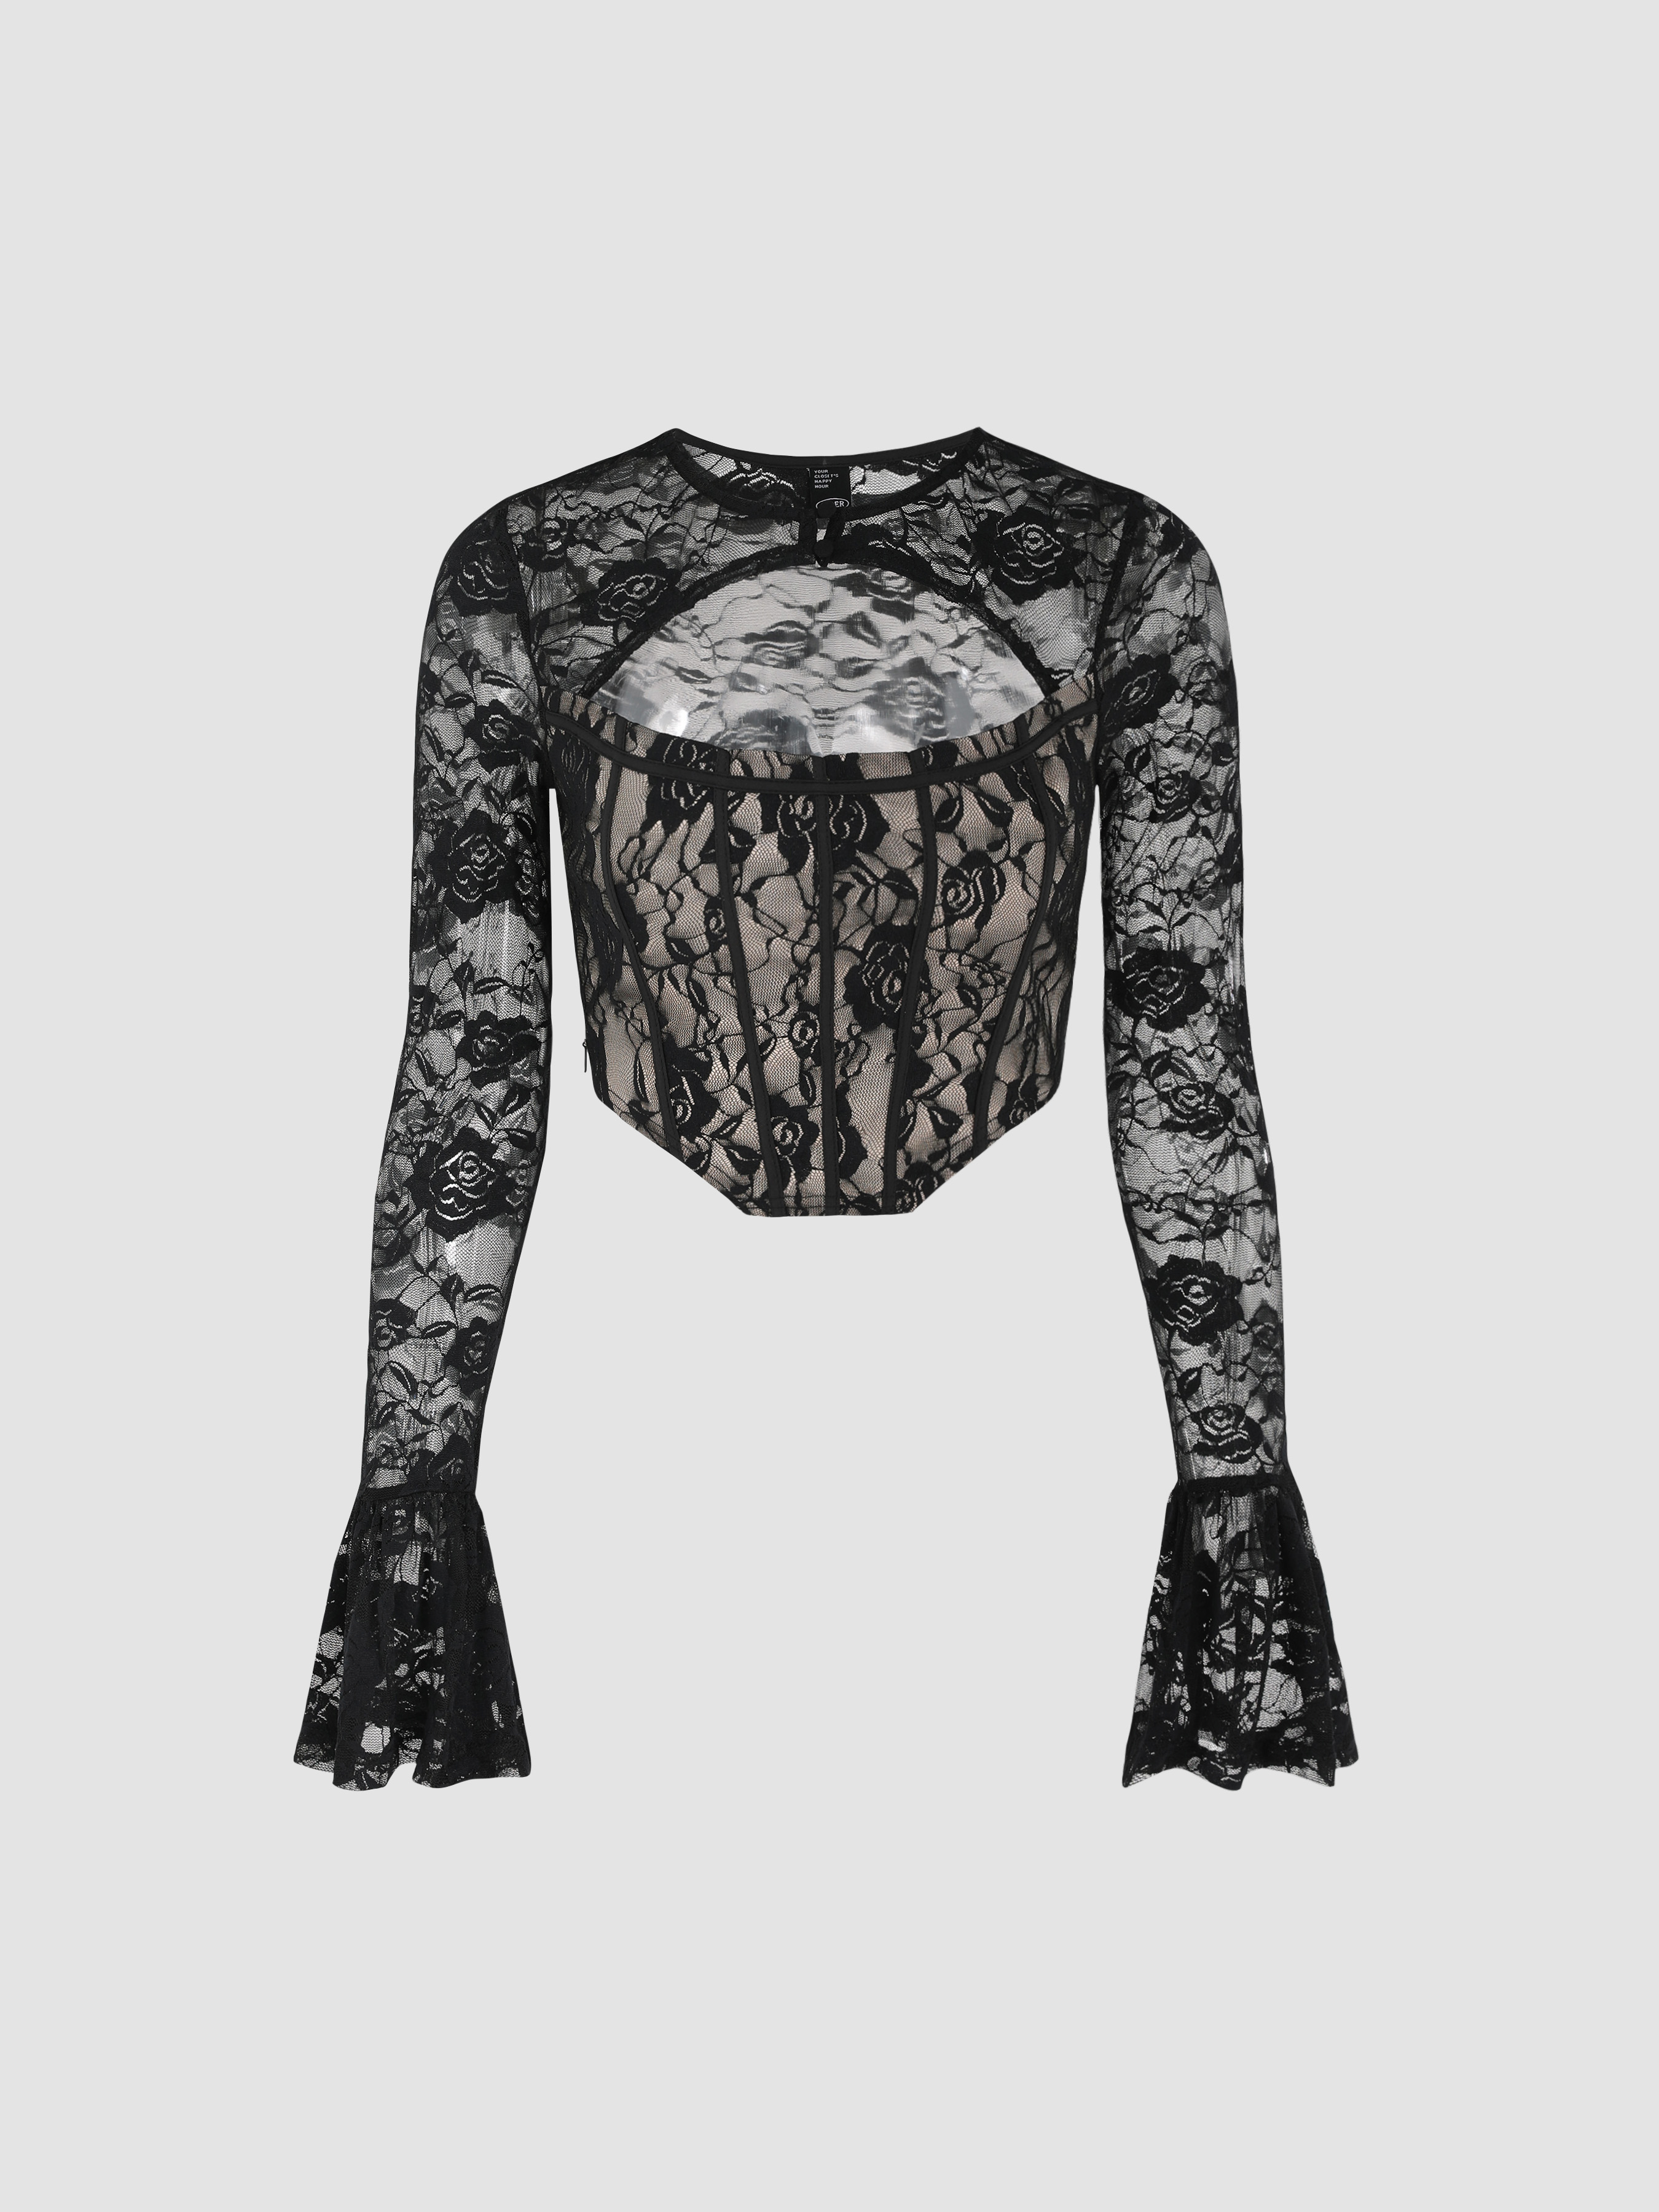 Floral Lace Cut Out Long Sleeve Corset Top - Cider